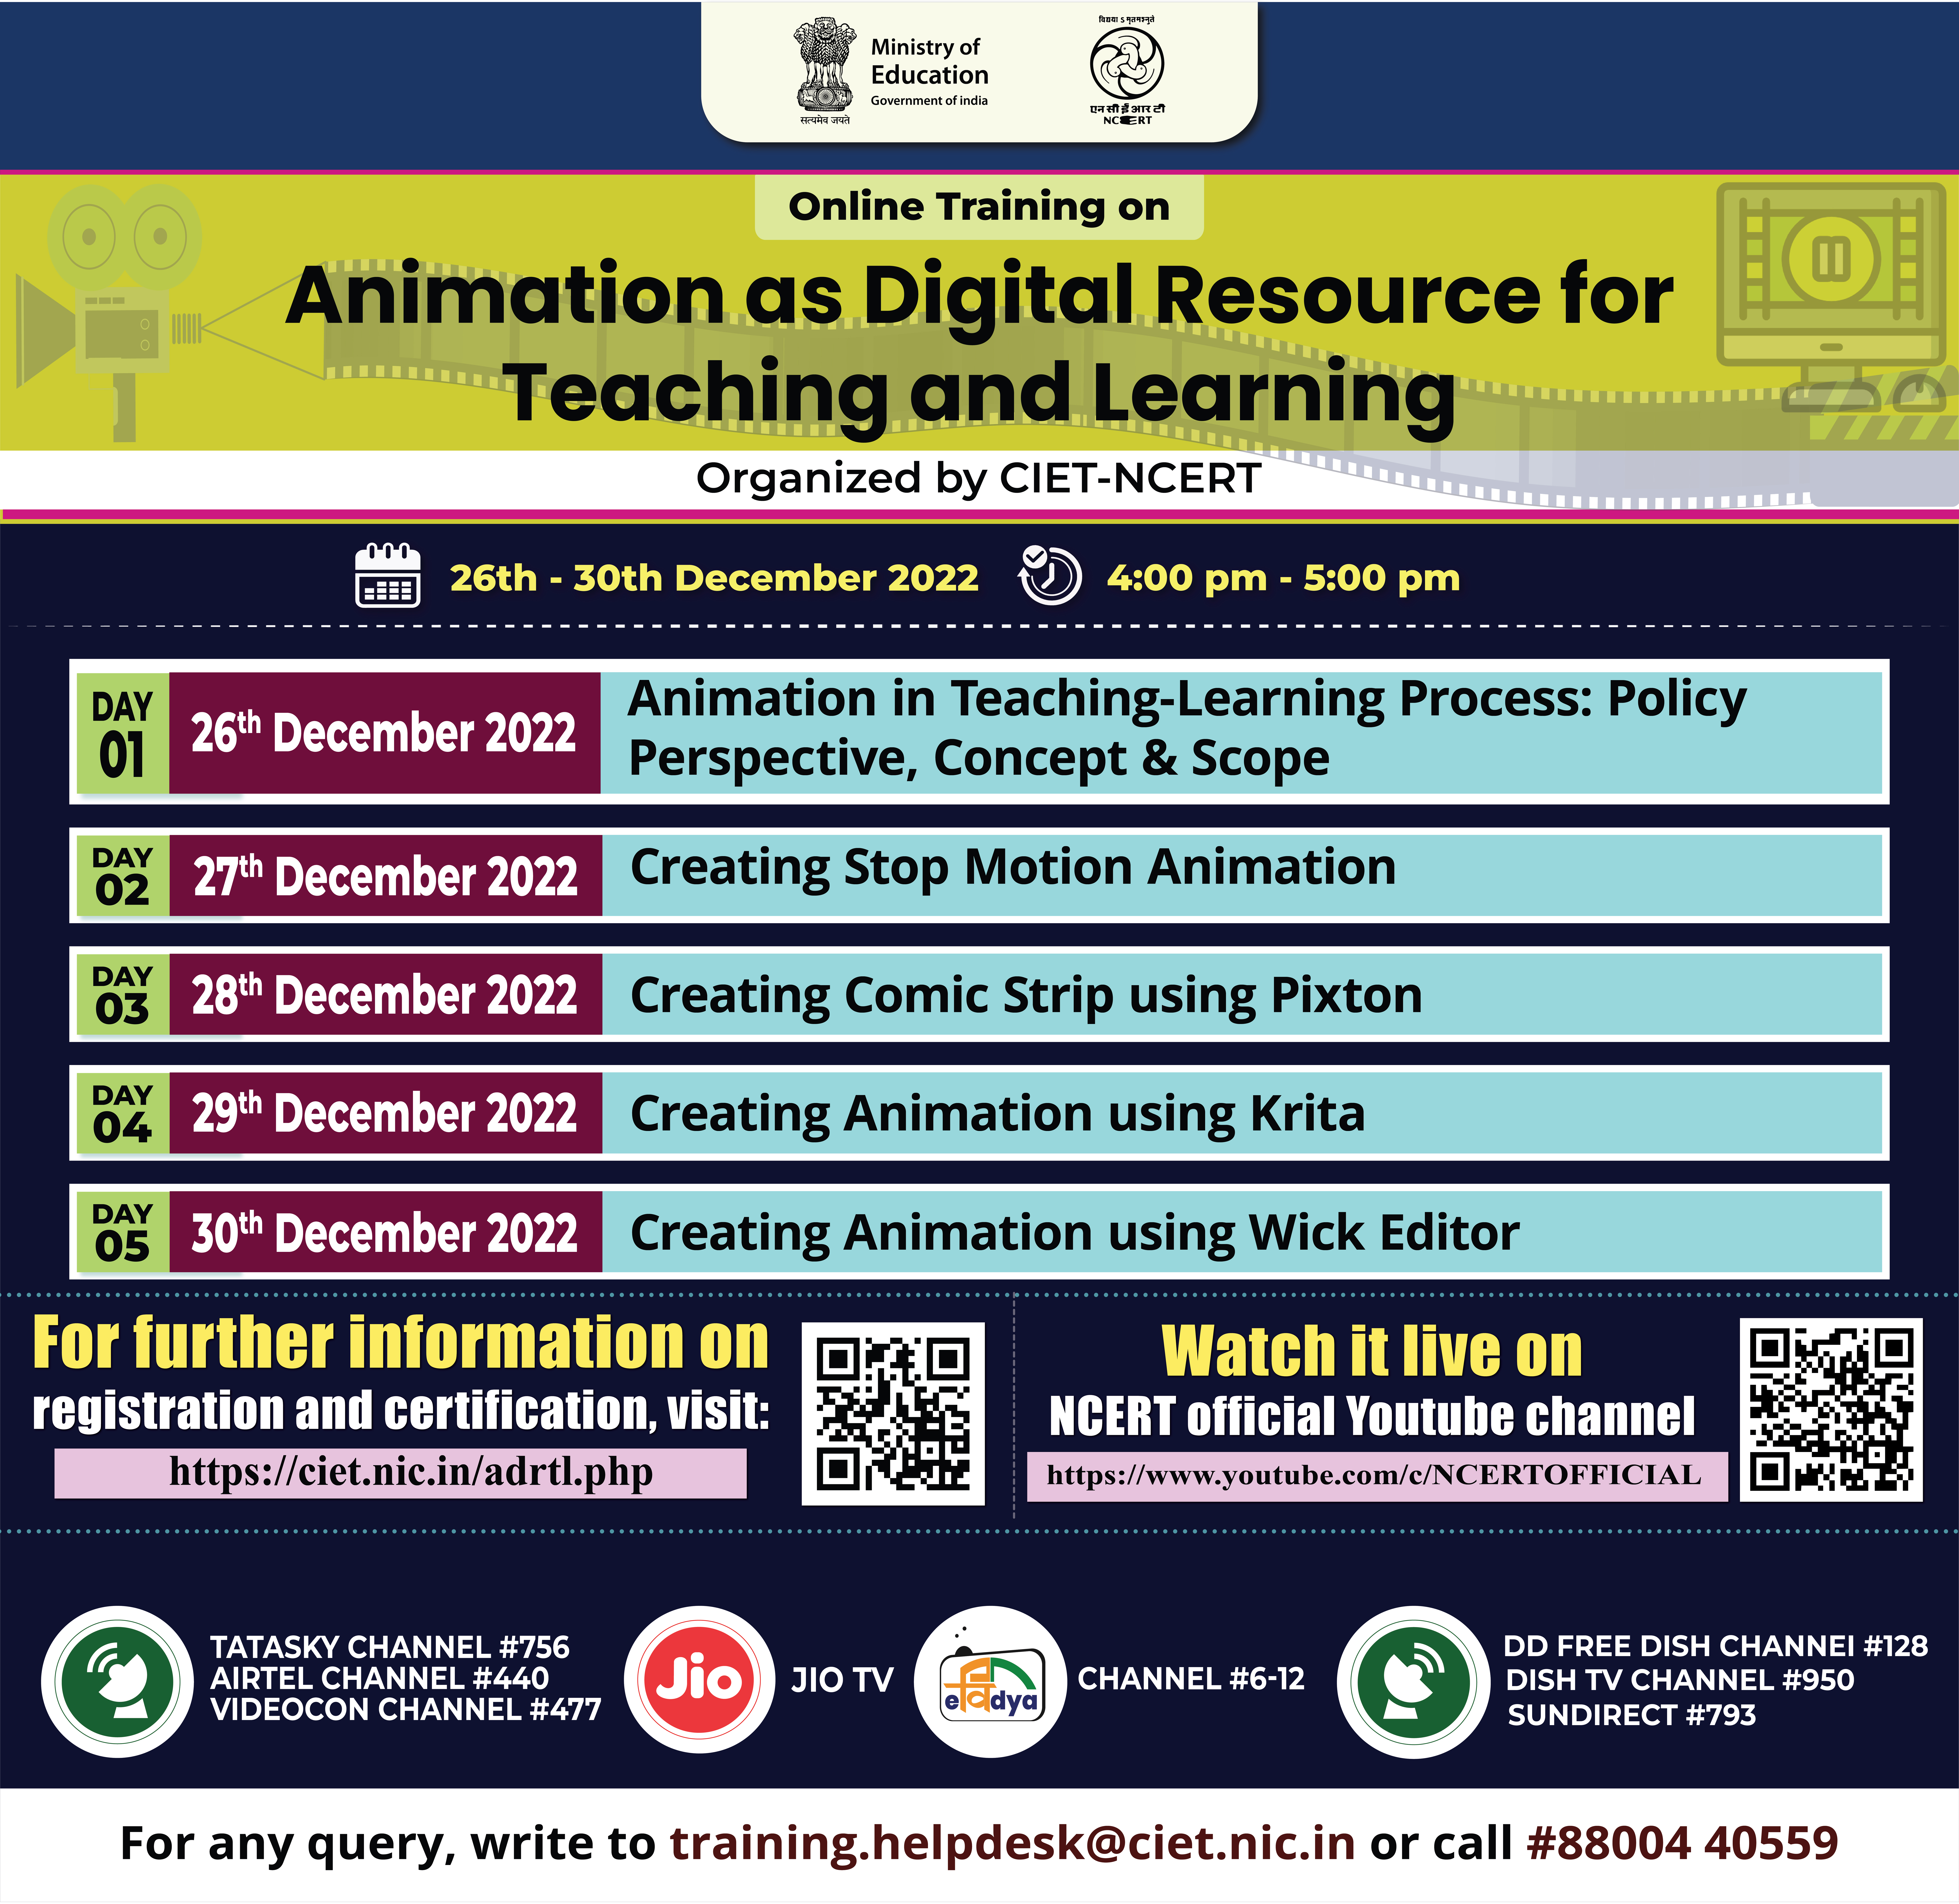 Online Training on “Animation as Digital Resource for Teaching and Learning” Image